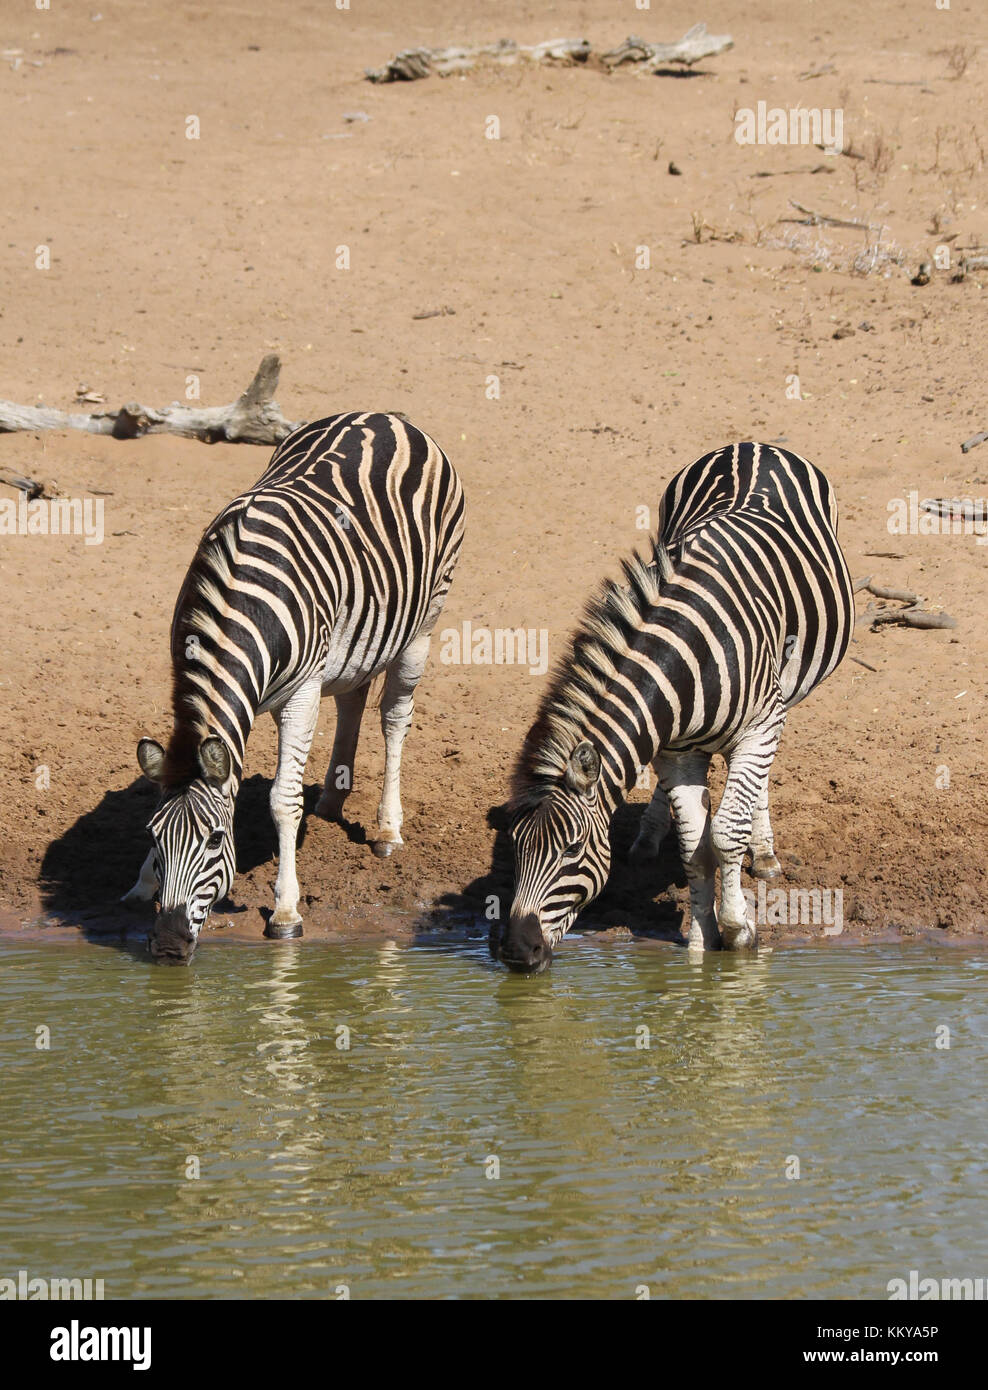 Zebras at the watering hole in Mkuze Game Reserve, South Africa Stock Photo